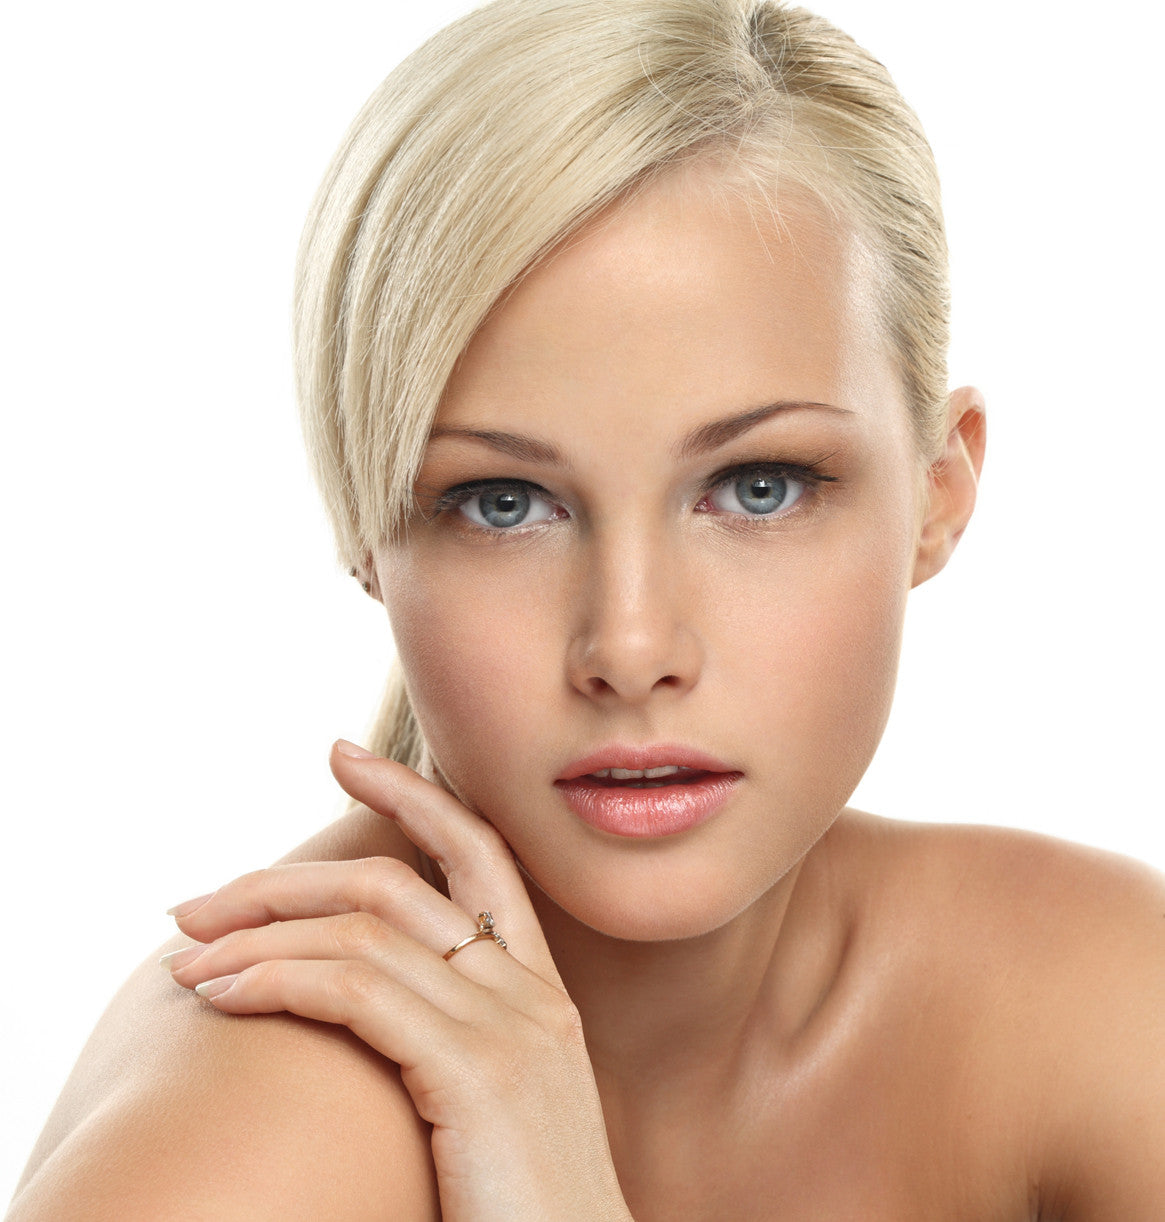 5 Tips to Avoid Early Skin Aging